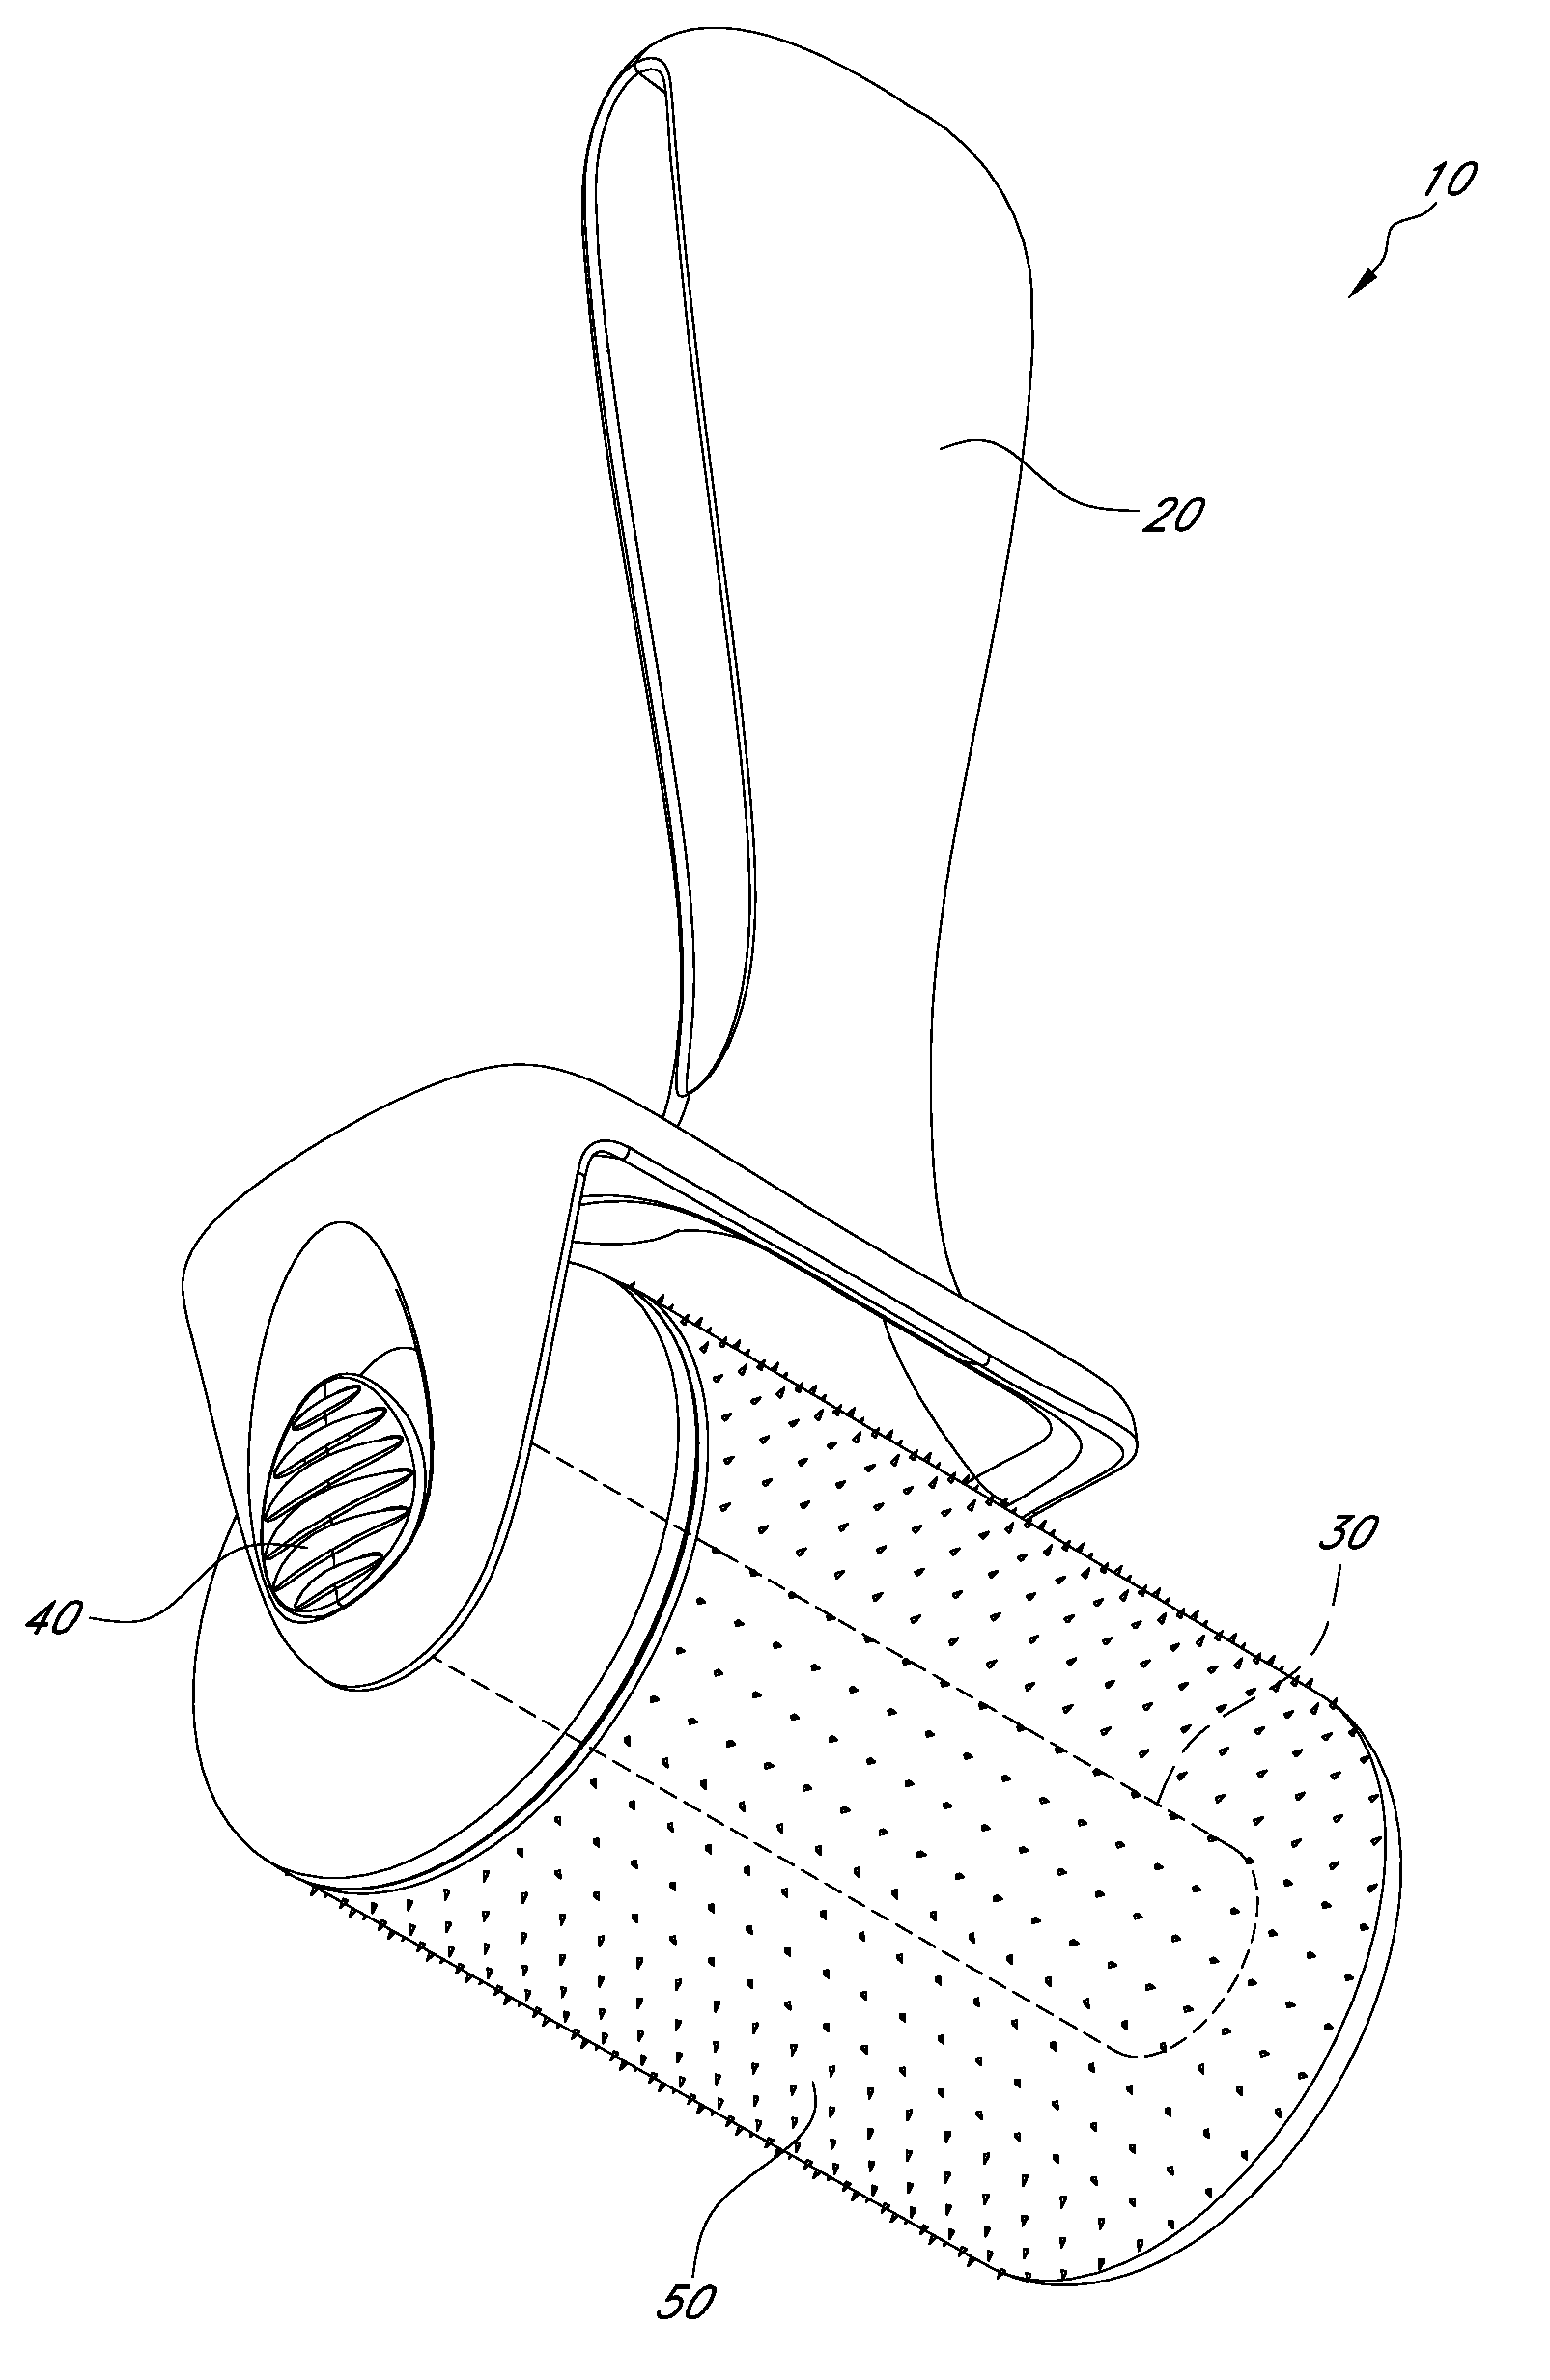 Dermal roller with therapeutic microstructures